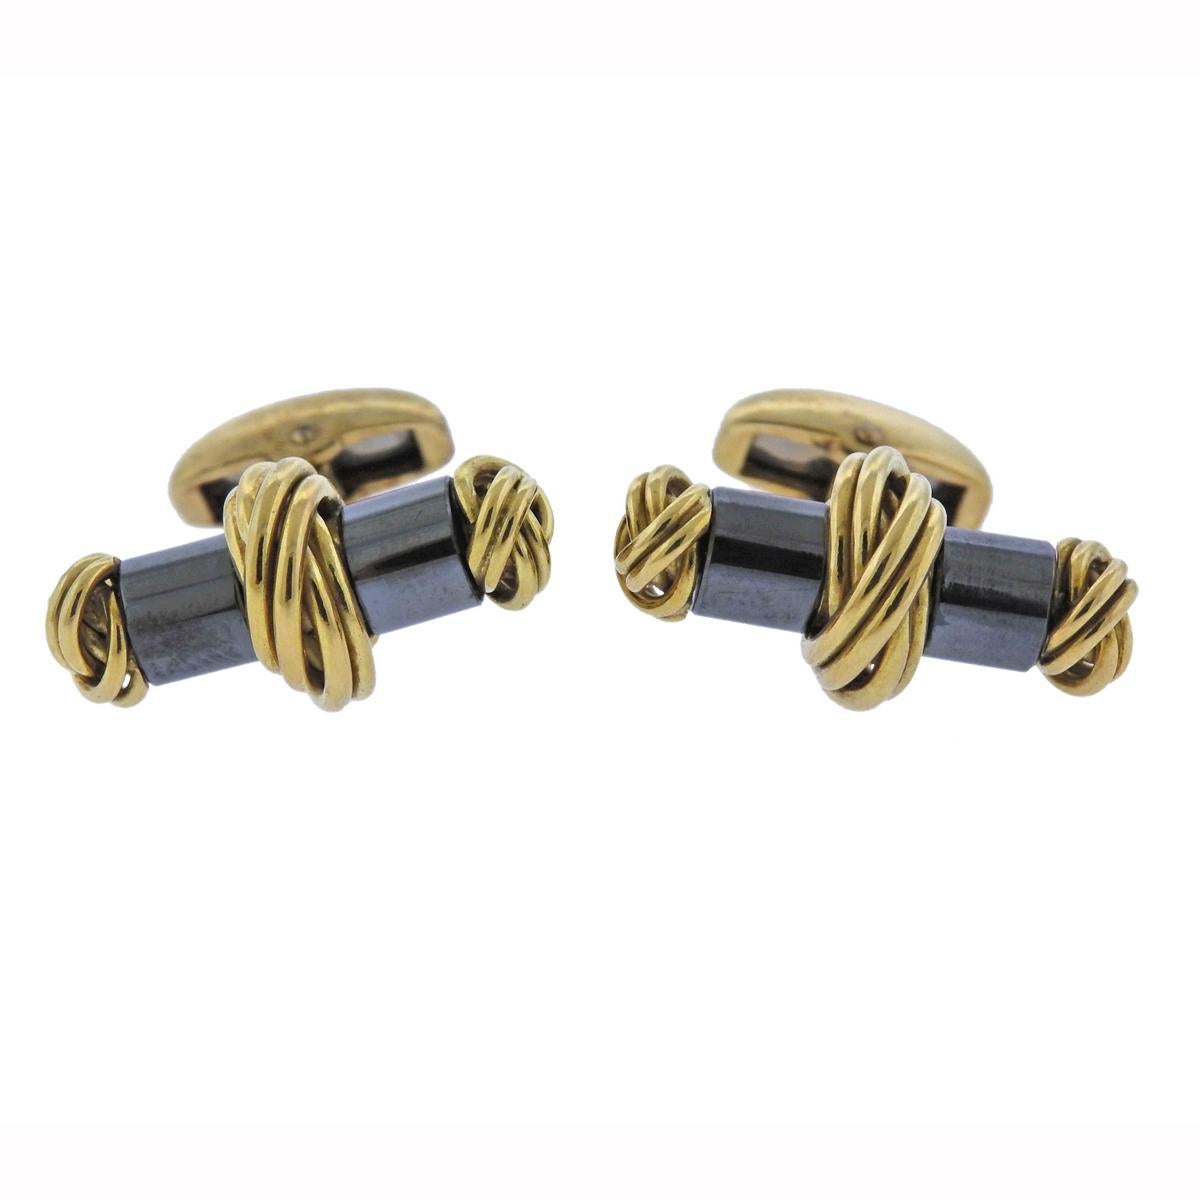 Pair of classic 18k yellow gold and hematite cufflinks, crafted by Deakin & Francis.  Cufflink top measures 23mm x 12mm, weigh 23.1 grams. Marked: D & F, English gold assay marks.